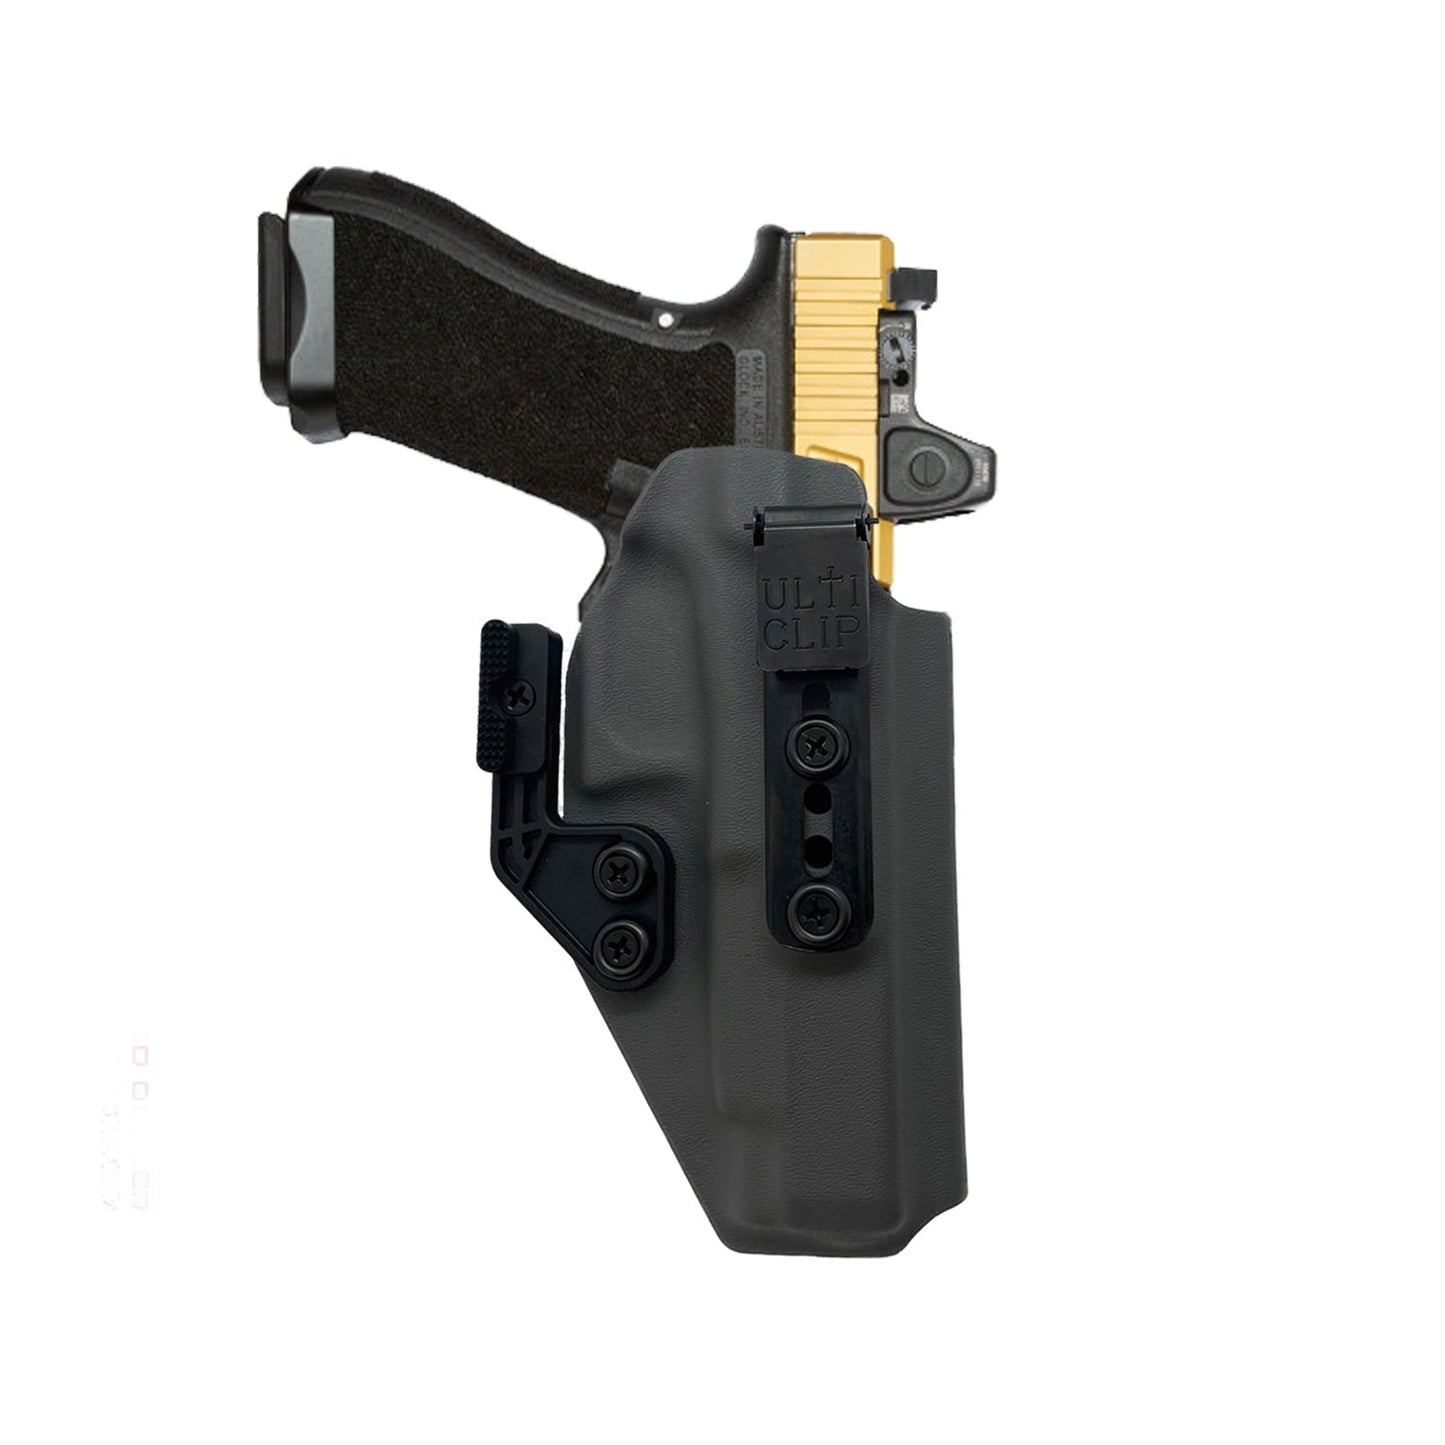 GLOCK 43/ 43X/ MOS WIth (ULTI-CLIP 3) IWB (Inside The Waistband Holster)